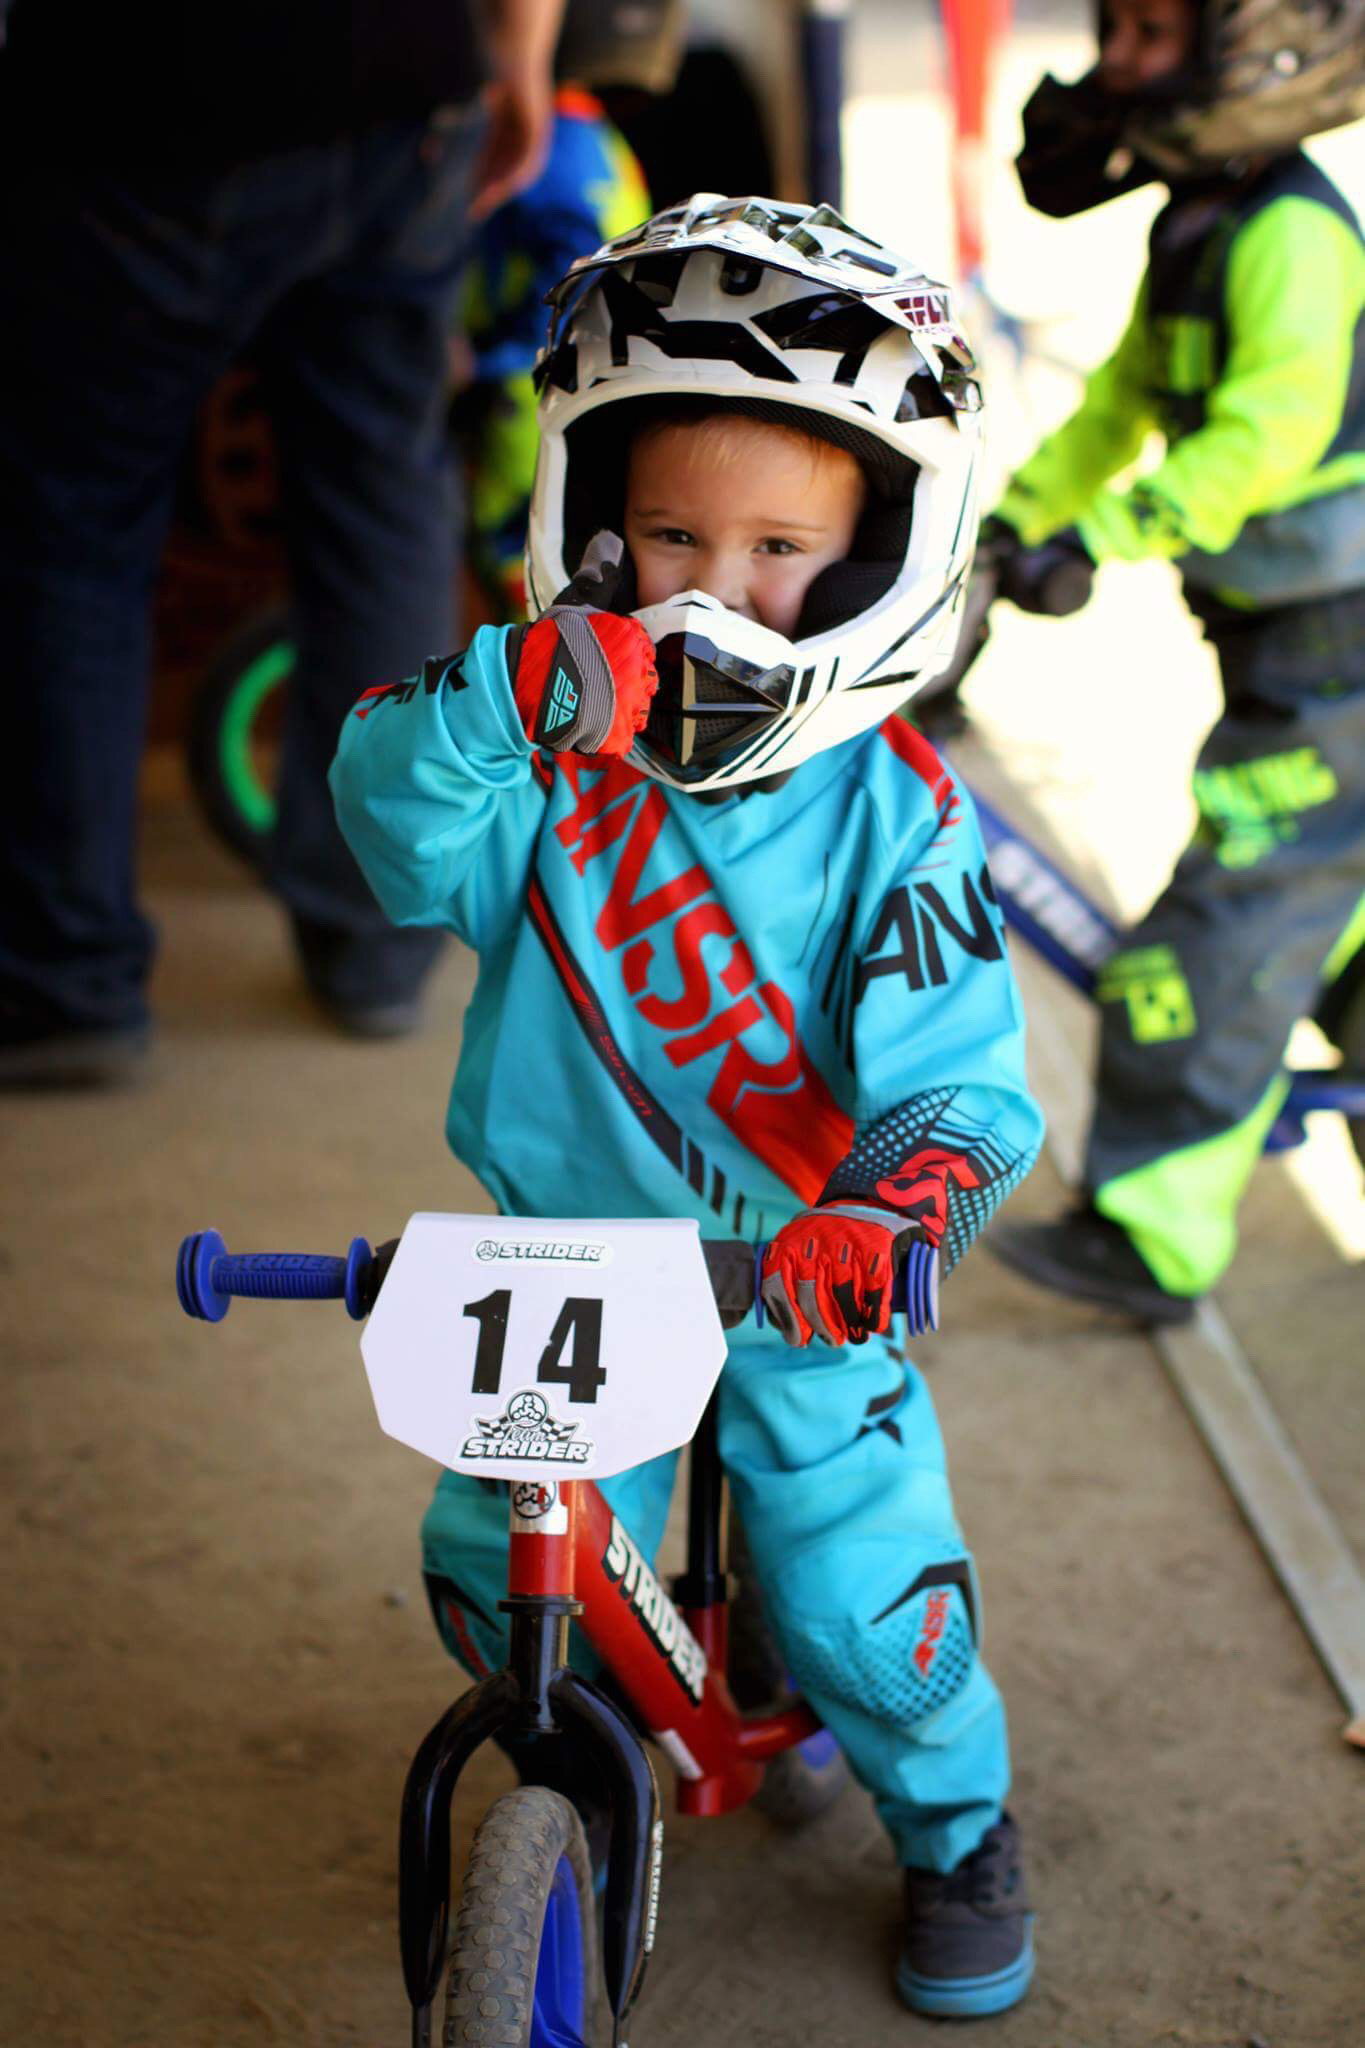 Kid giving thumbs up on custom 12 Sport with customized number plate